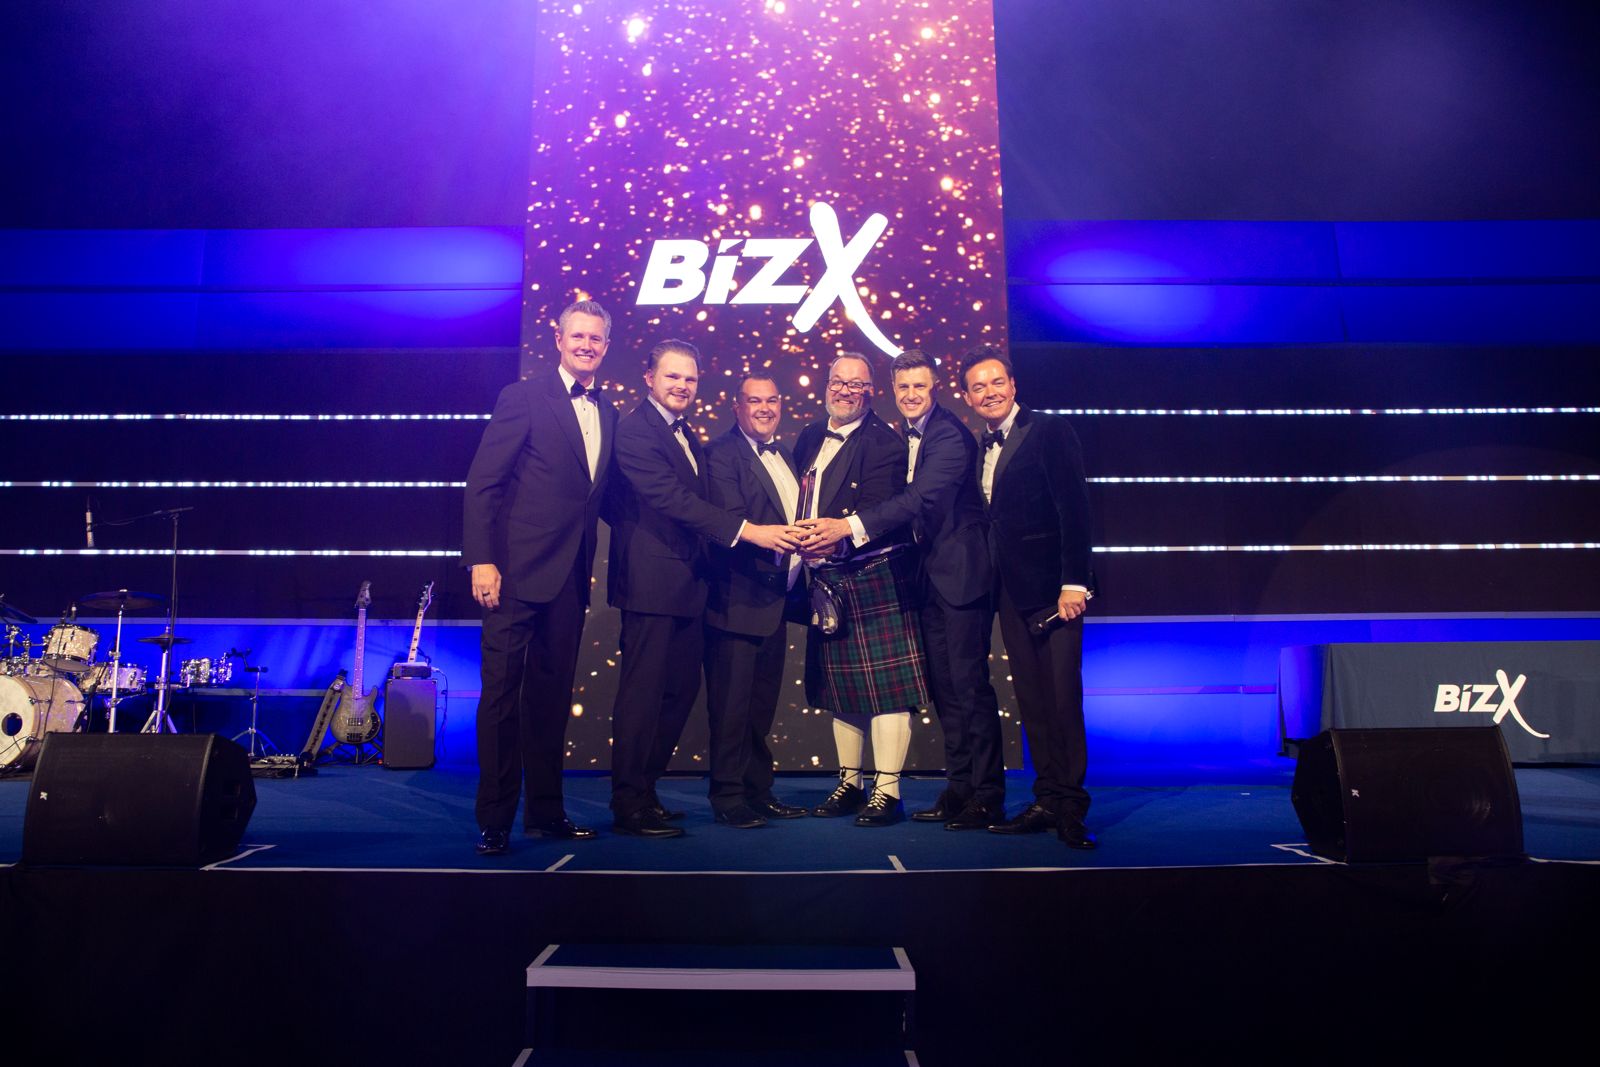 The Team receive the award at bizX for Best Overall Business